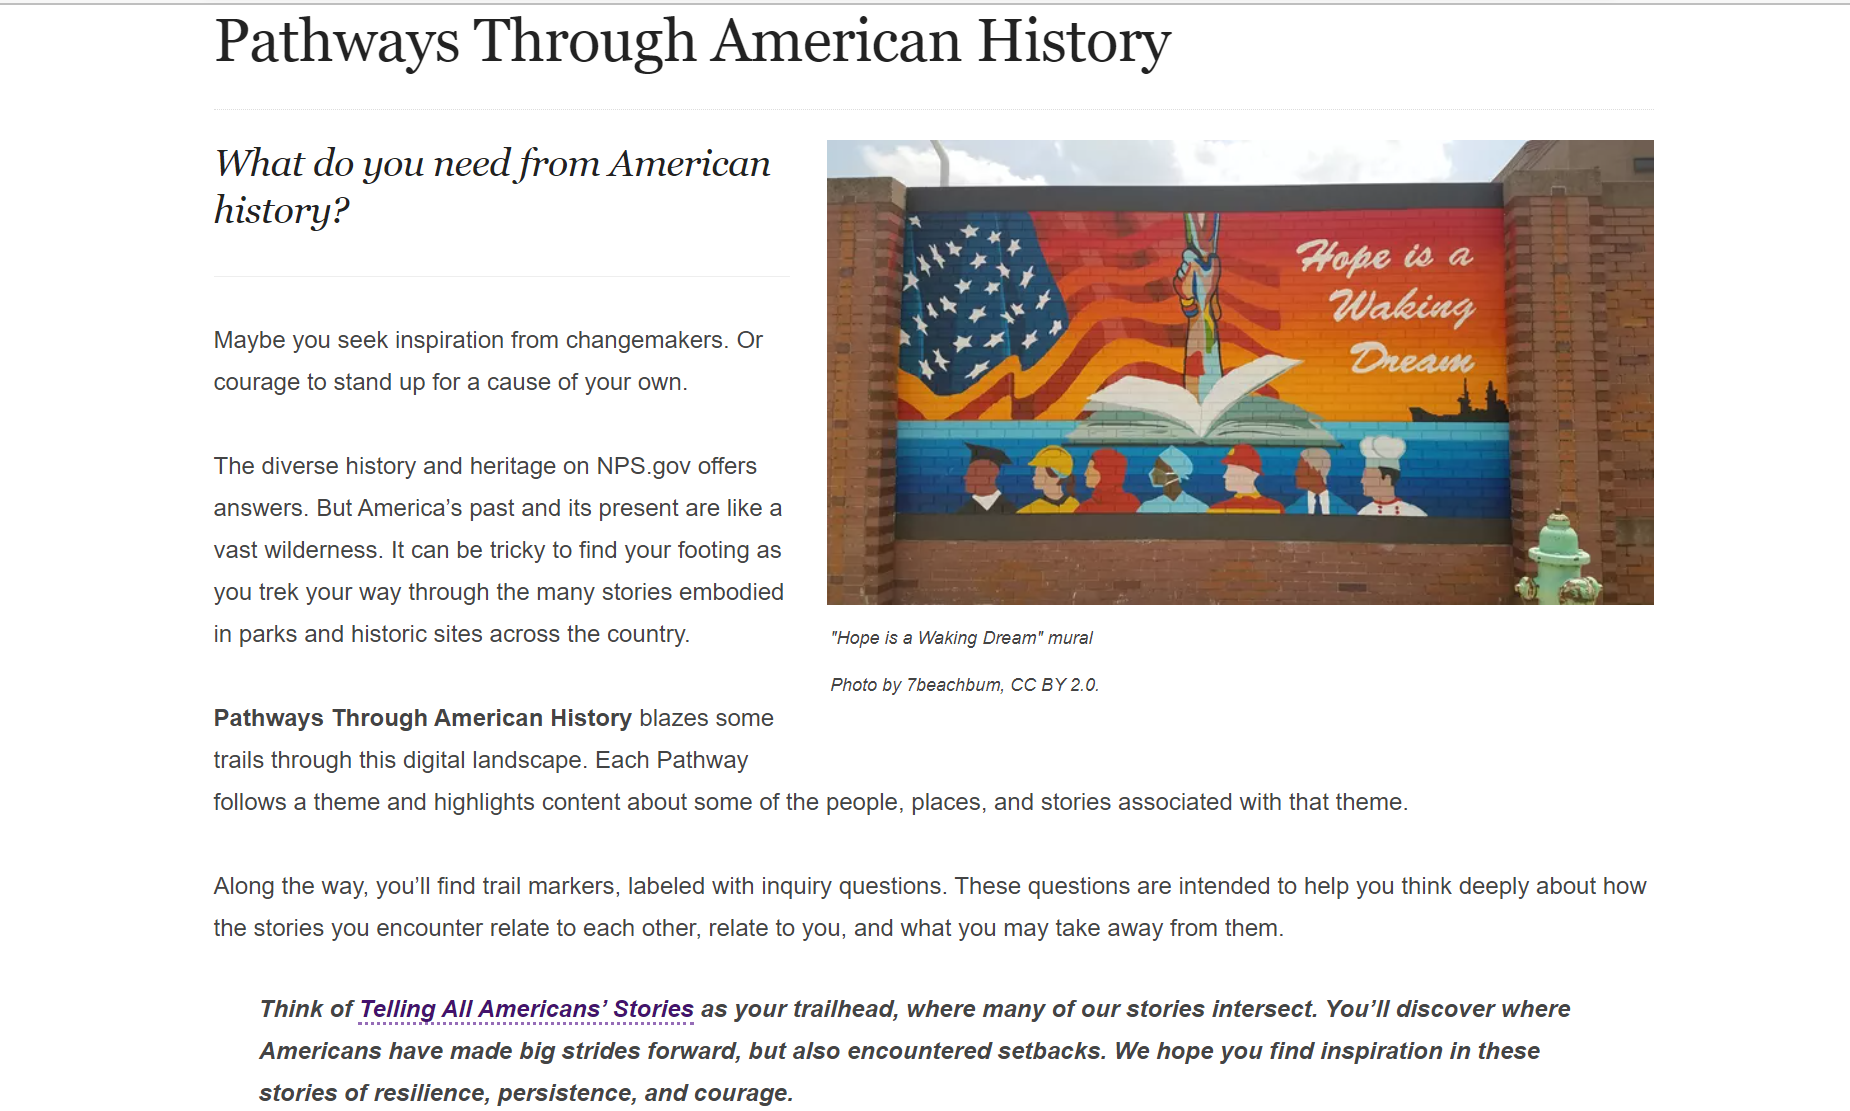 Screenshot of Pathways Through American History landing page. During the summer of 2021, Jade produced four Pathways Through American History. They guide users through some of the diverse history and heritage on NPS.gov using themes and inquiry questions.